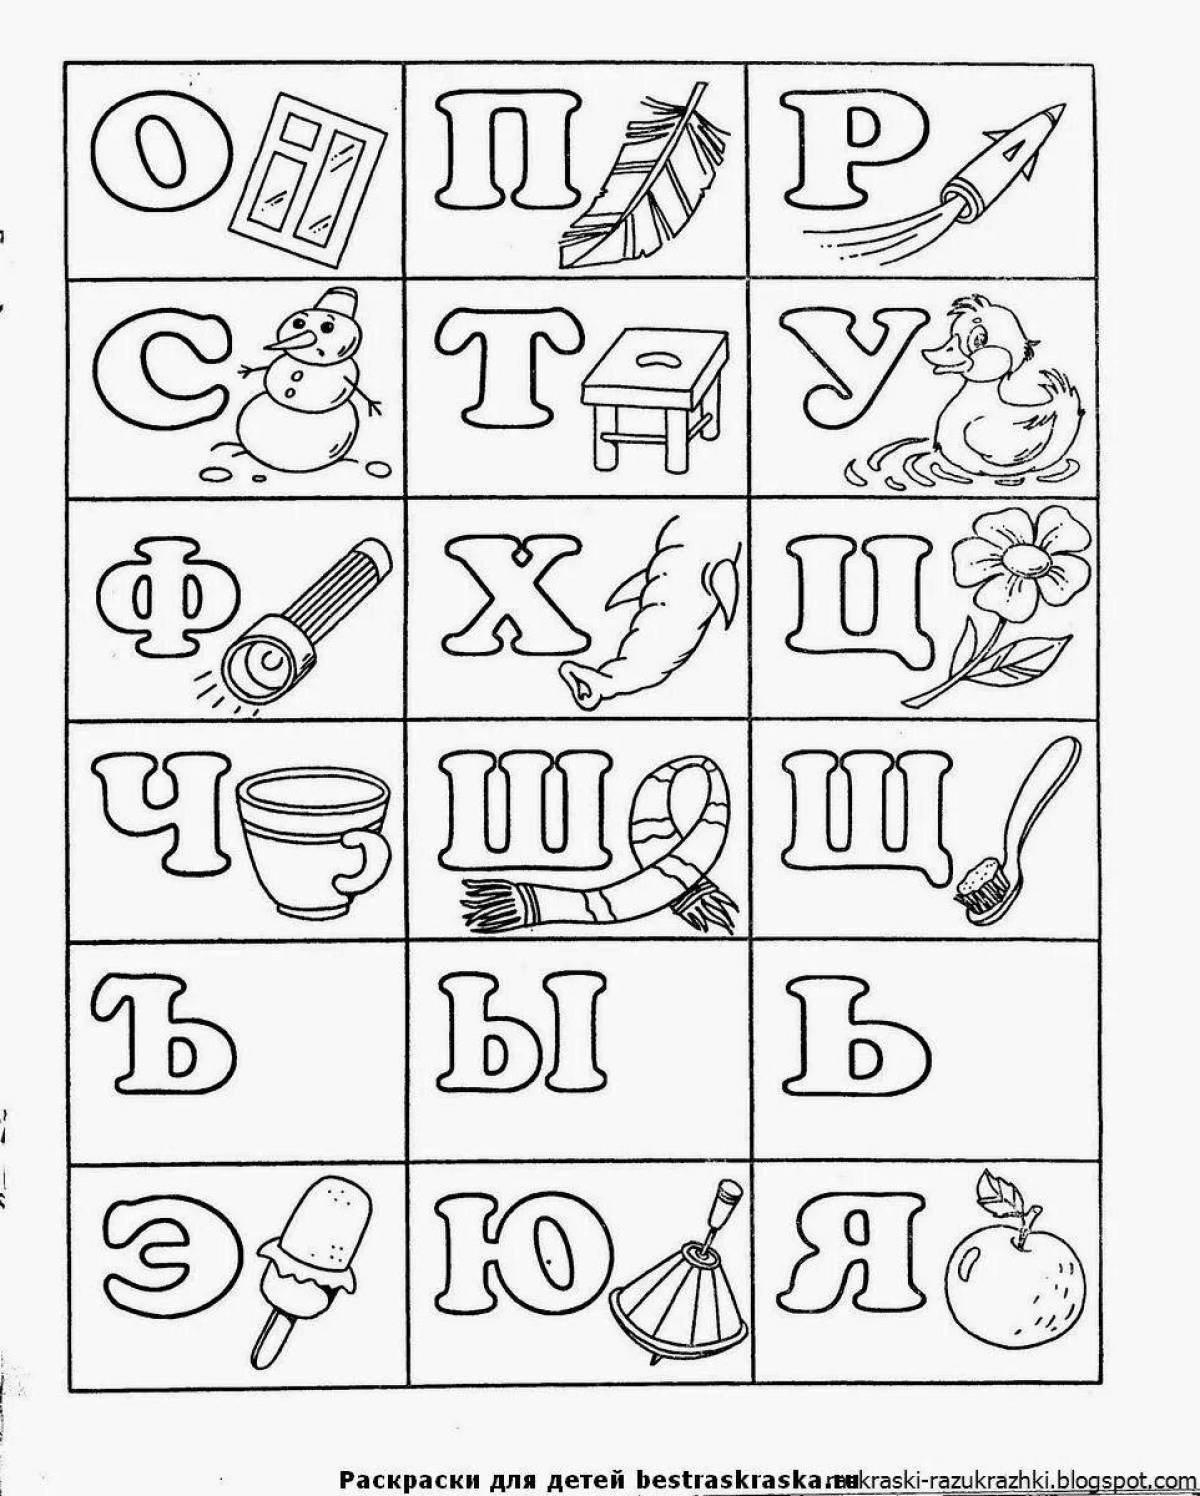 Colouring the fun alphabet spell by letter